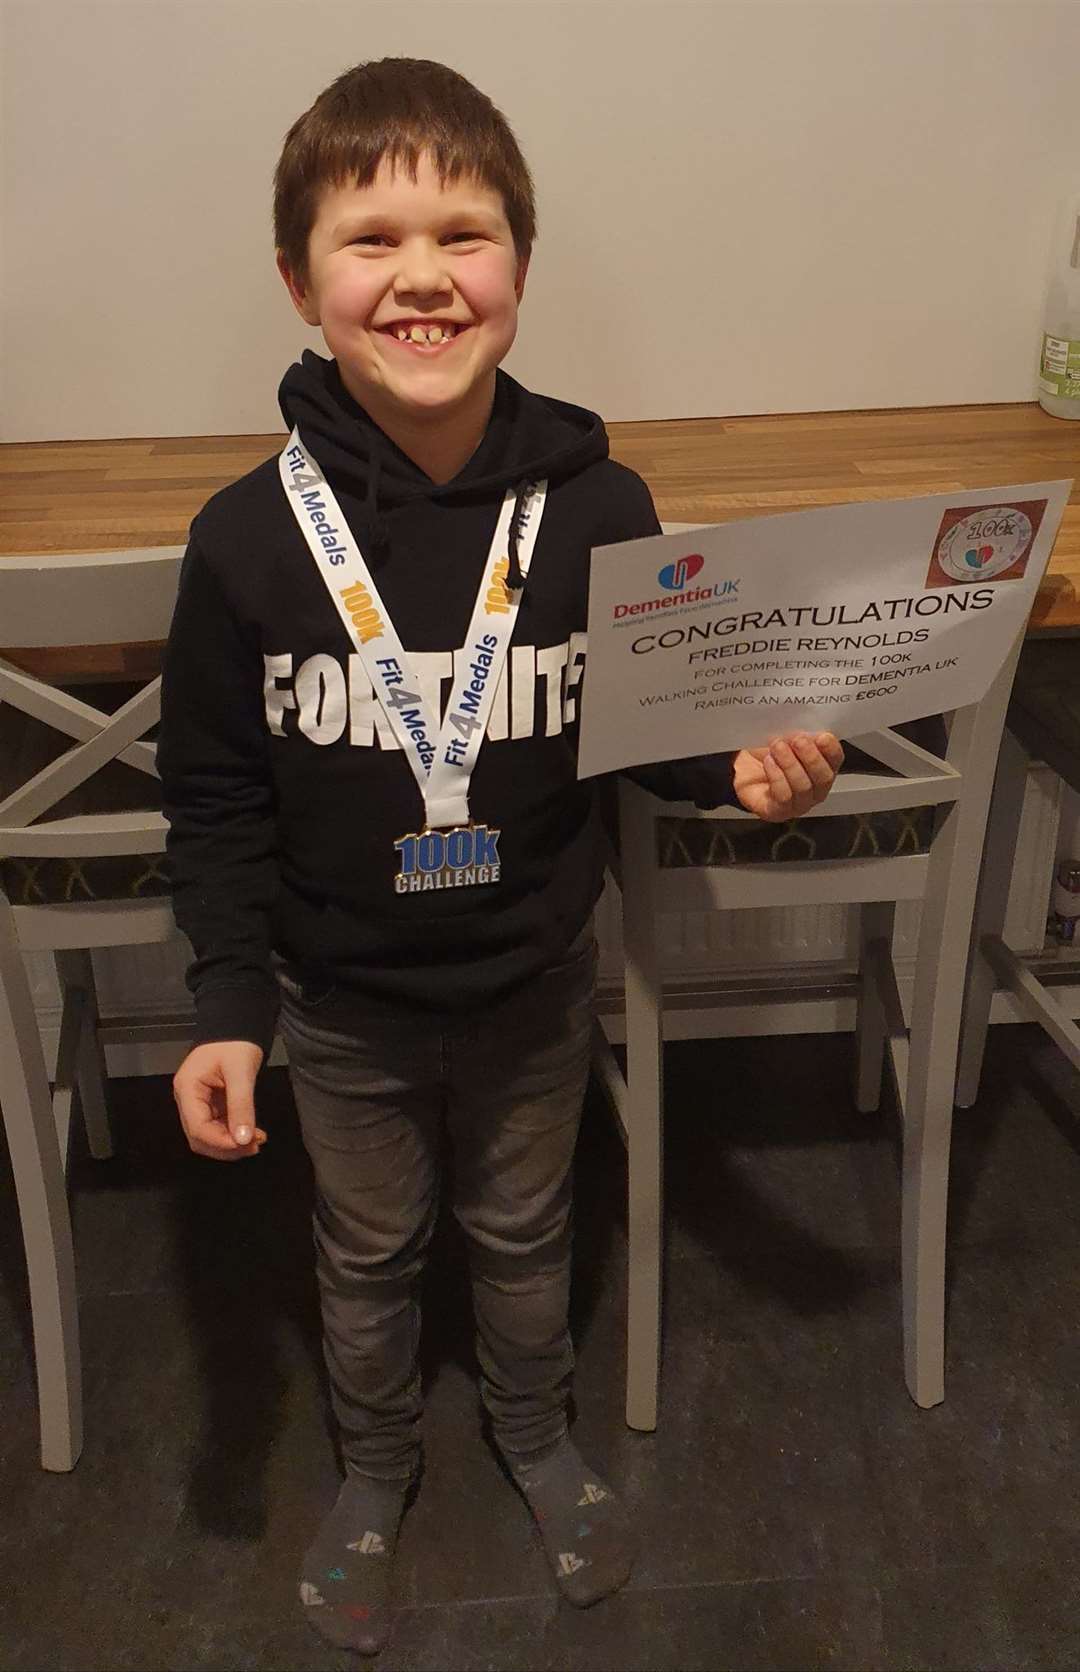 Freddie with his certificate and medal